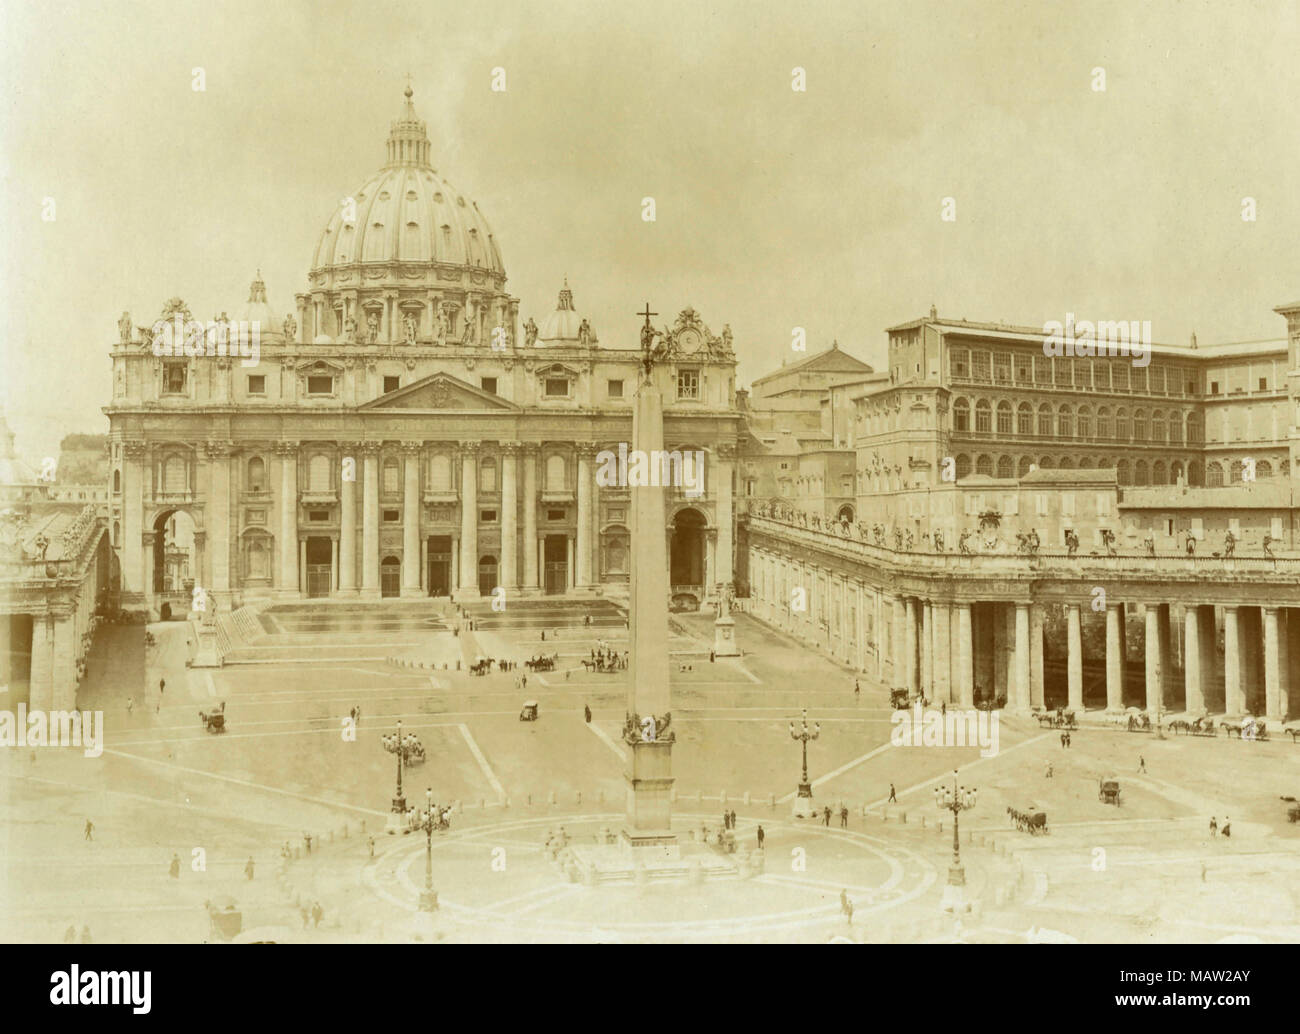 St. Peter's square, Rome, Italy 1880 Stock Photo